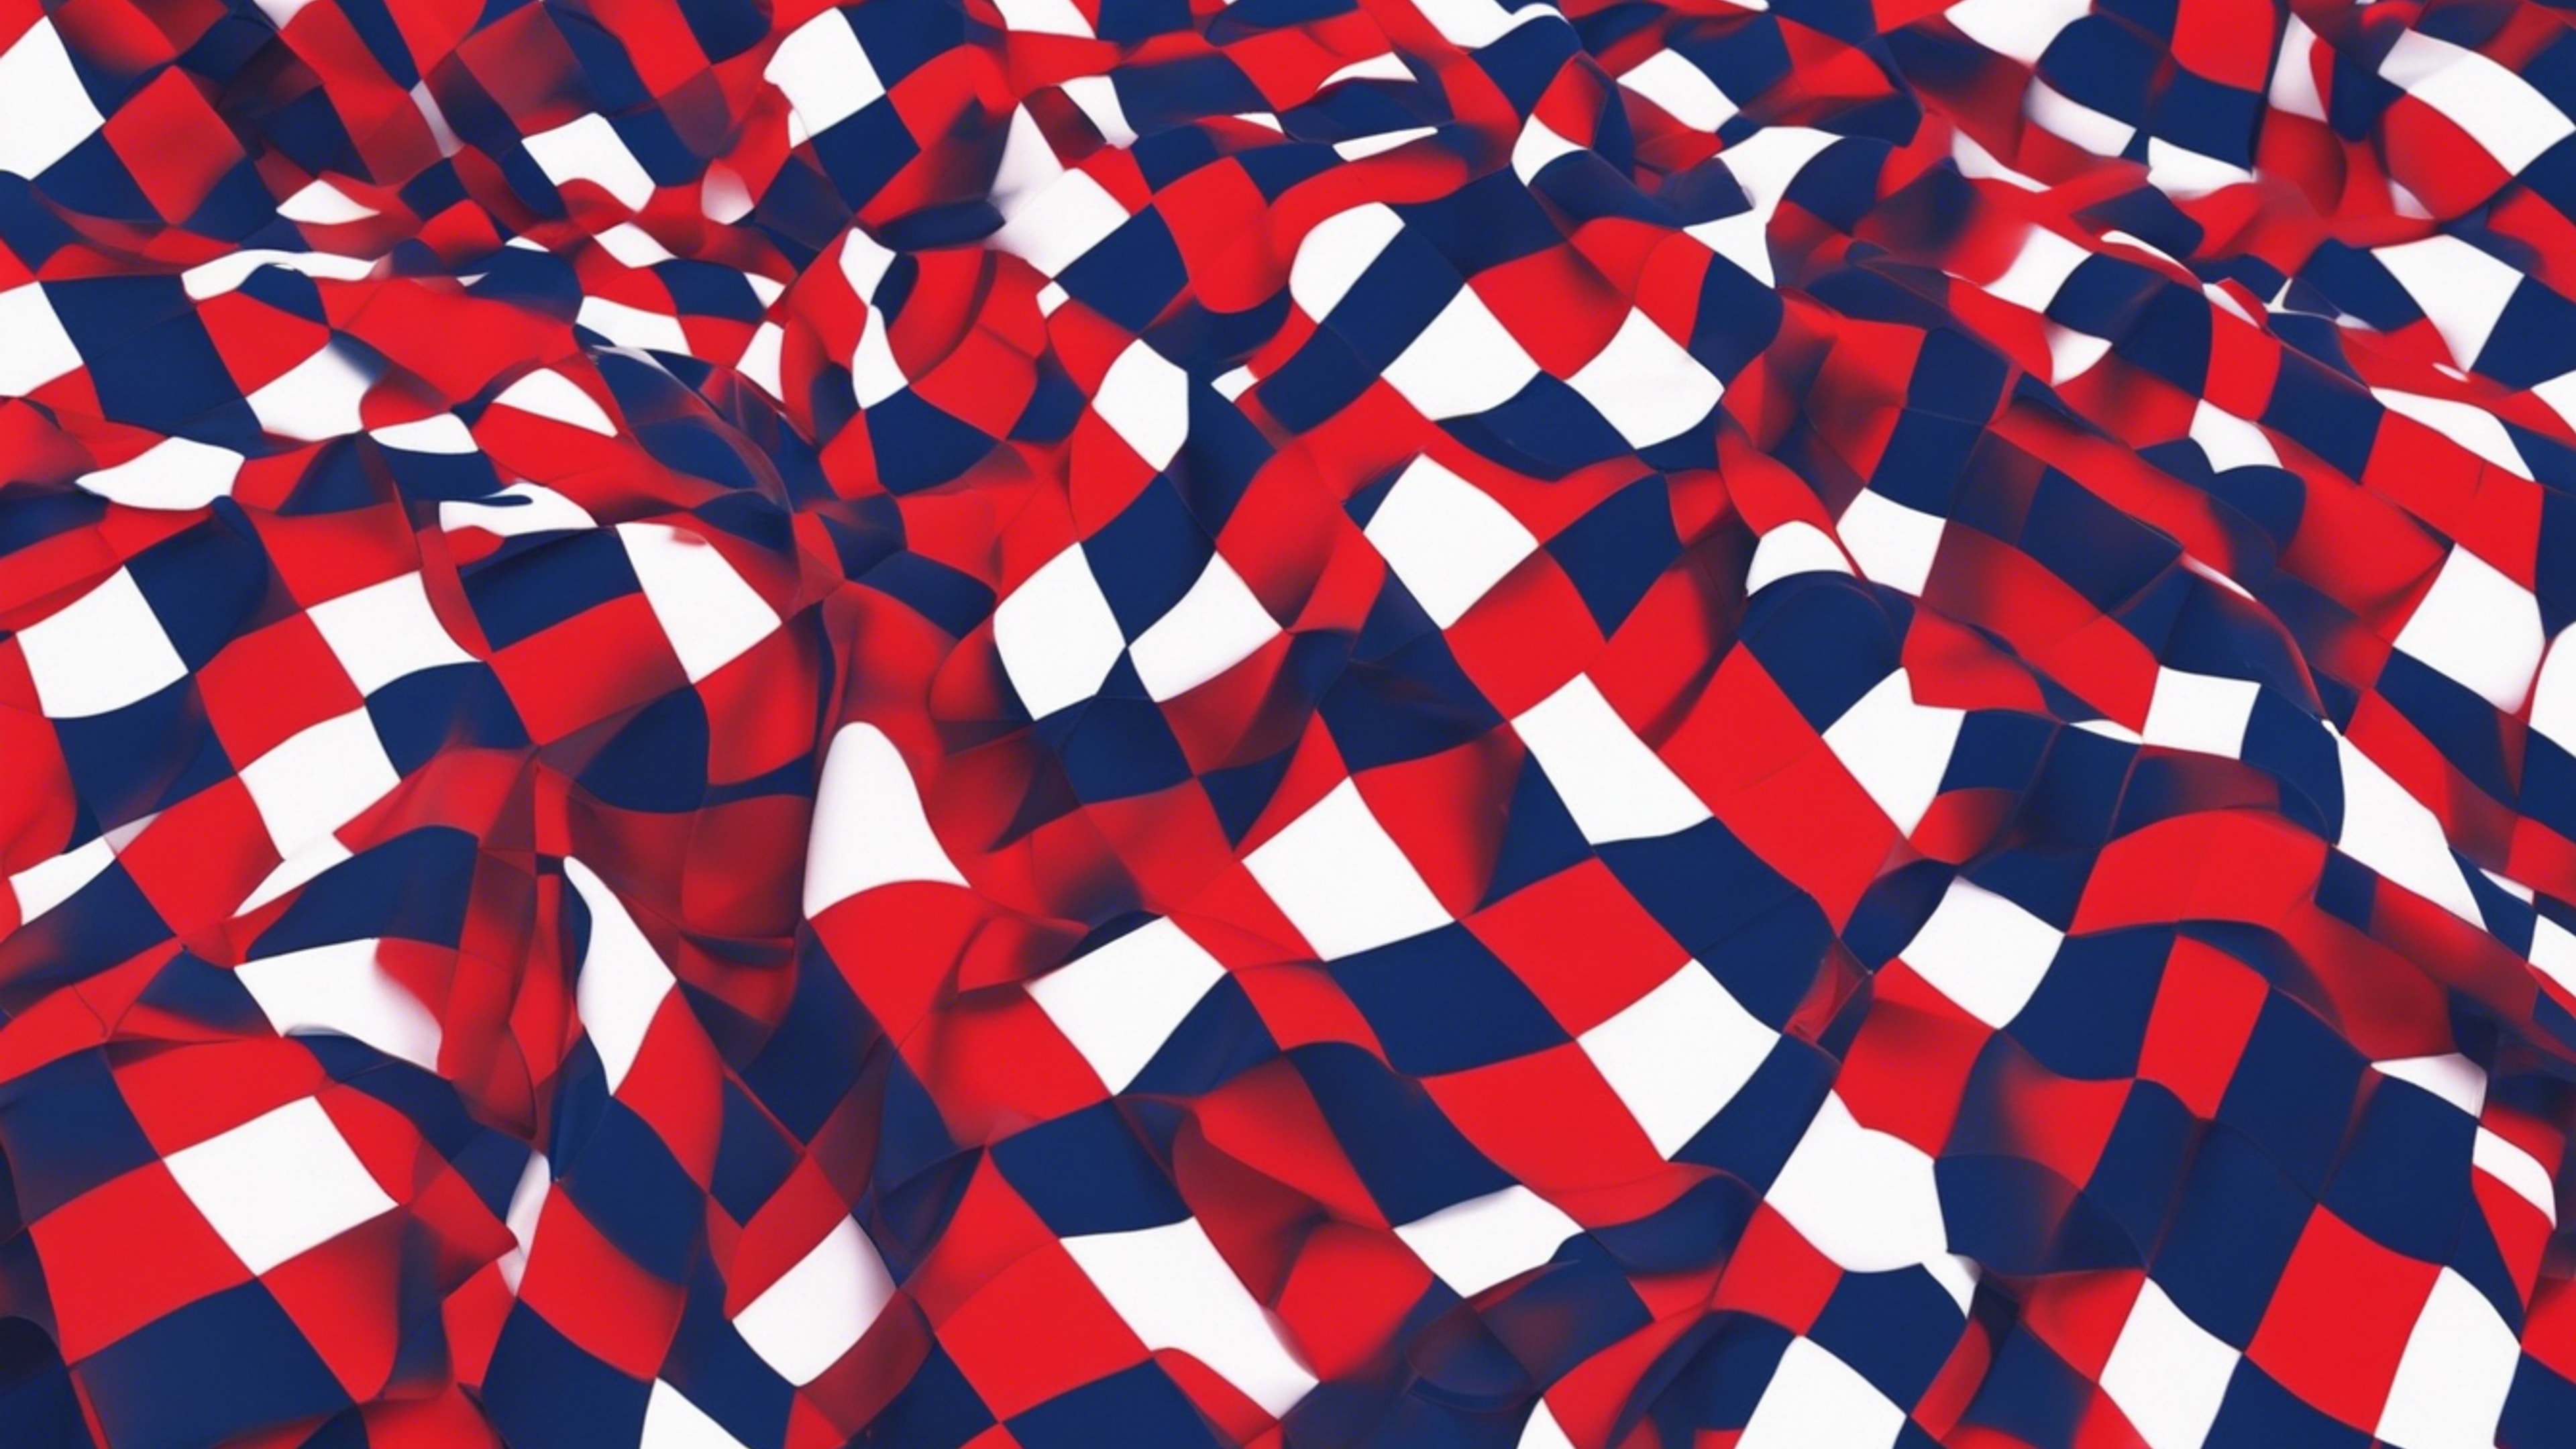 Bright red and navy squares forming a complex checkered pattern. 壁紙[590a1545db8846568581]